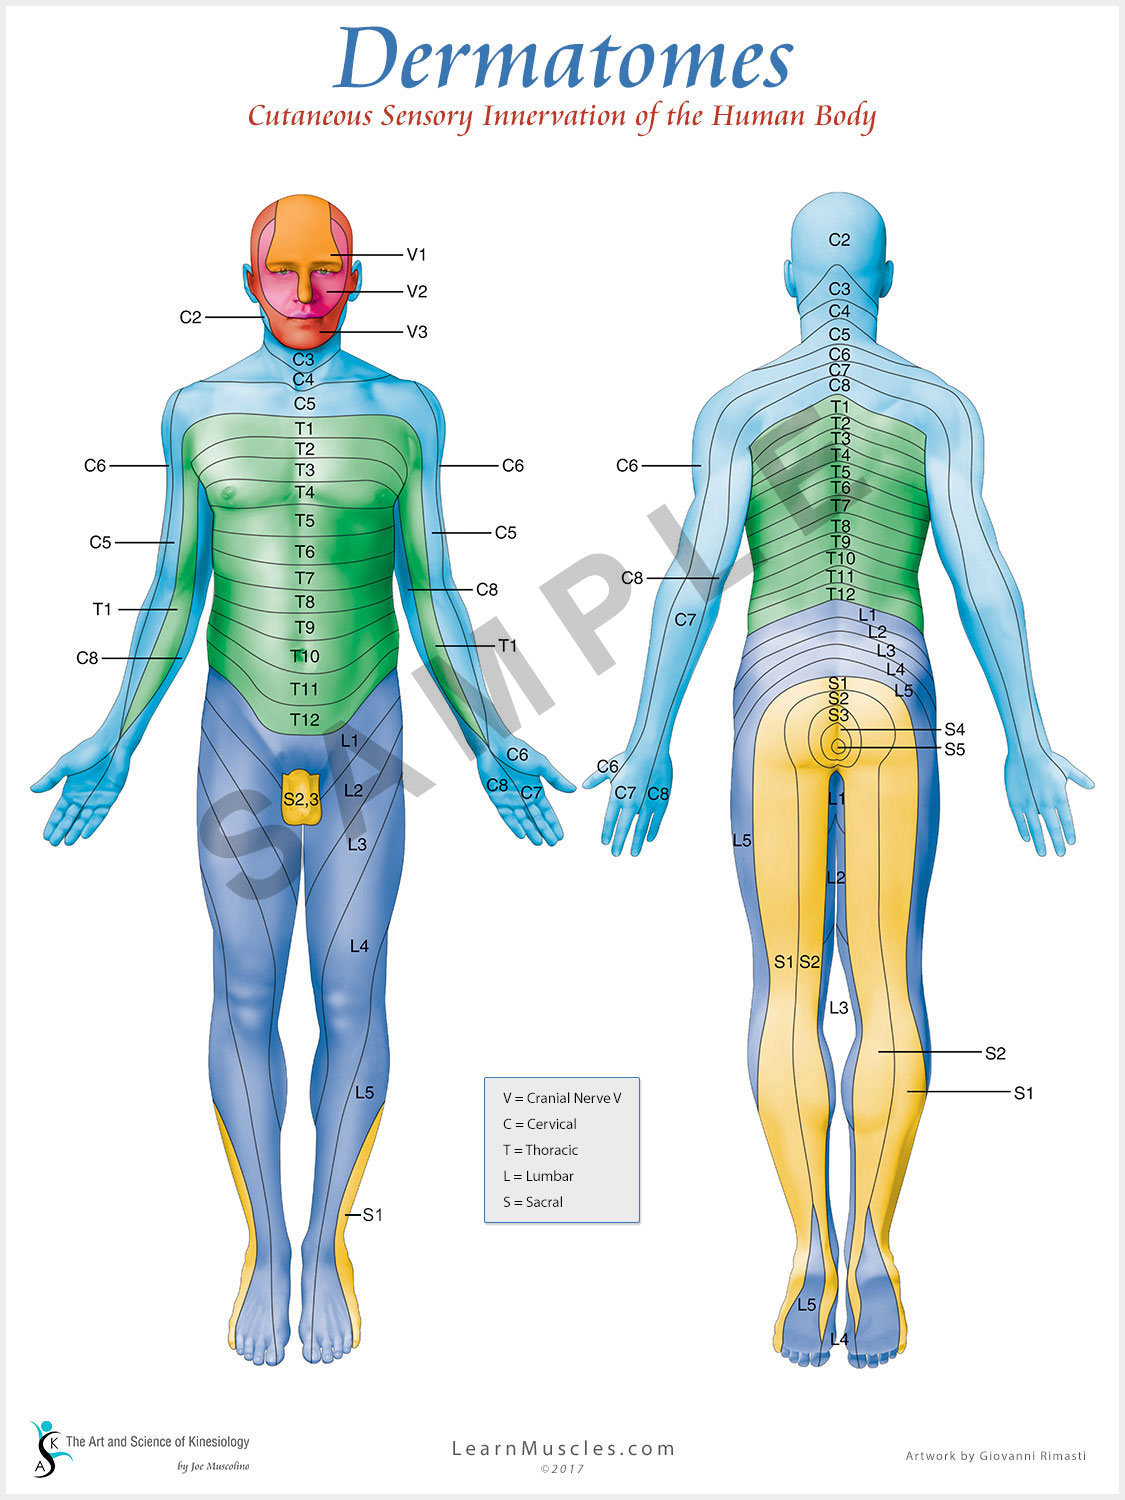 Dermatomes 18" x 24" Premium Poster Learn Muscles